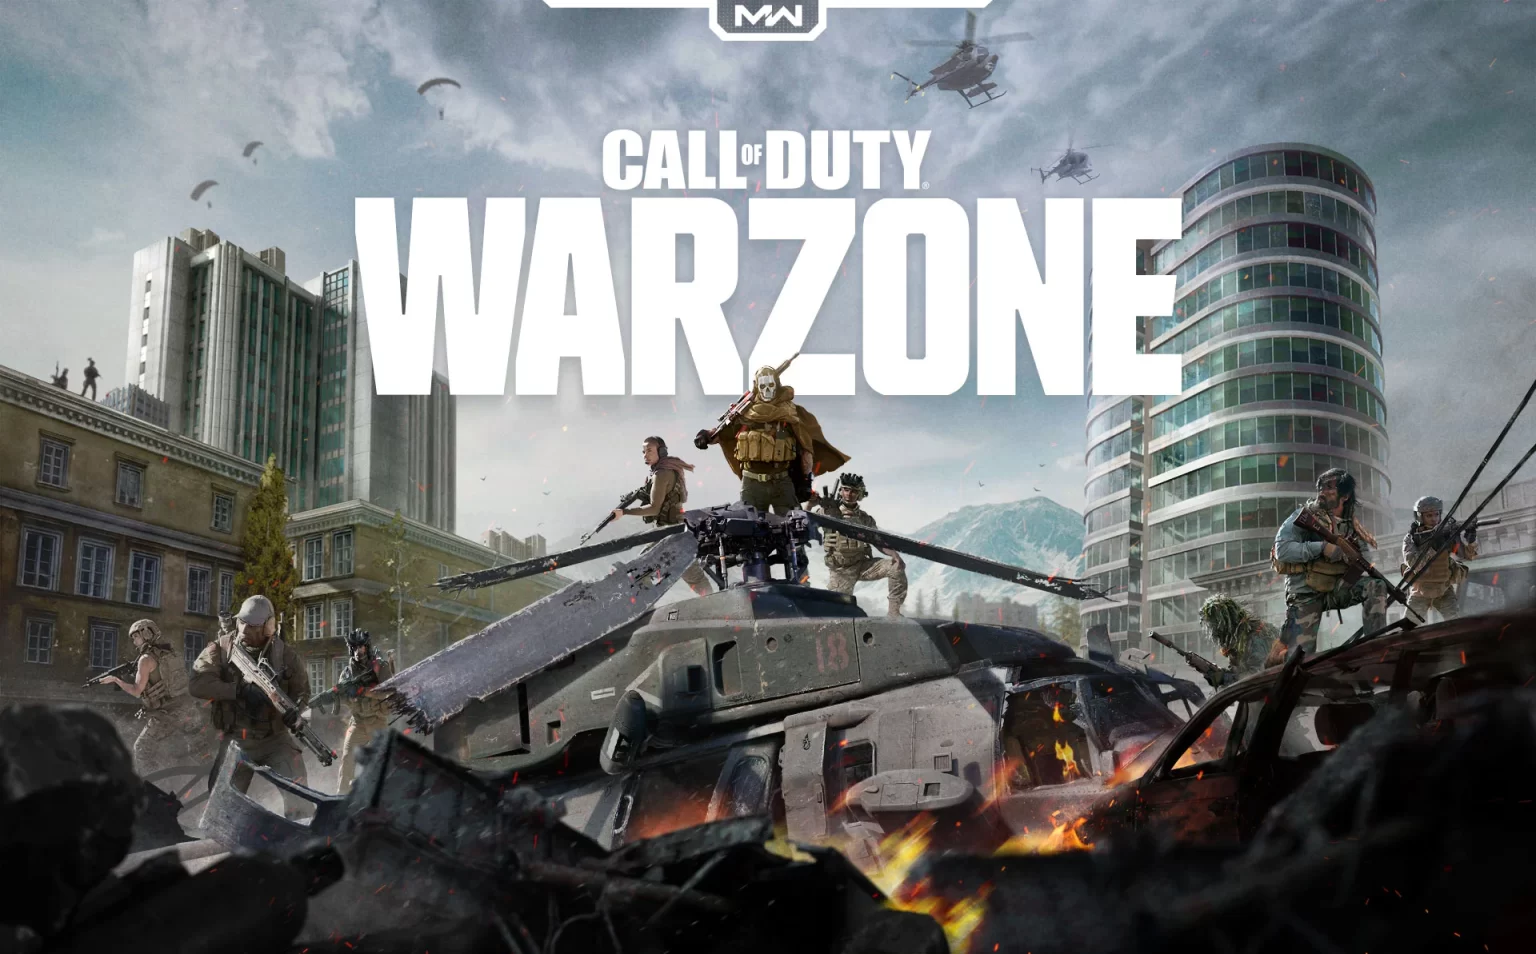 AGB WZ 0309 TOUT 1536x954 - Call of Duty Warzone Android pre-registration is now open